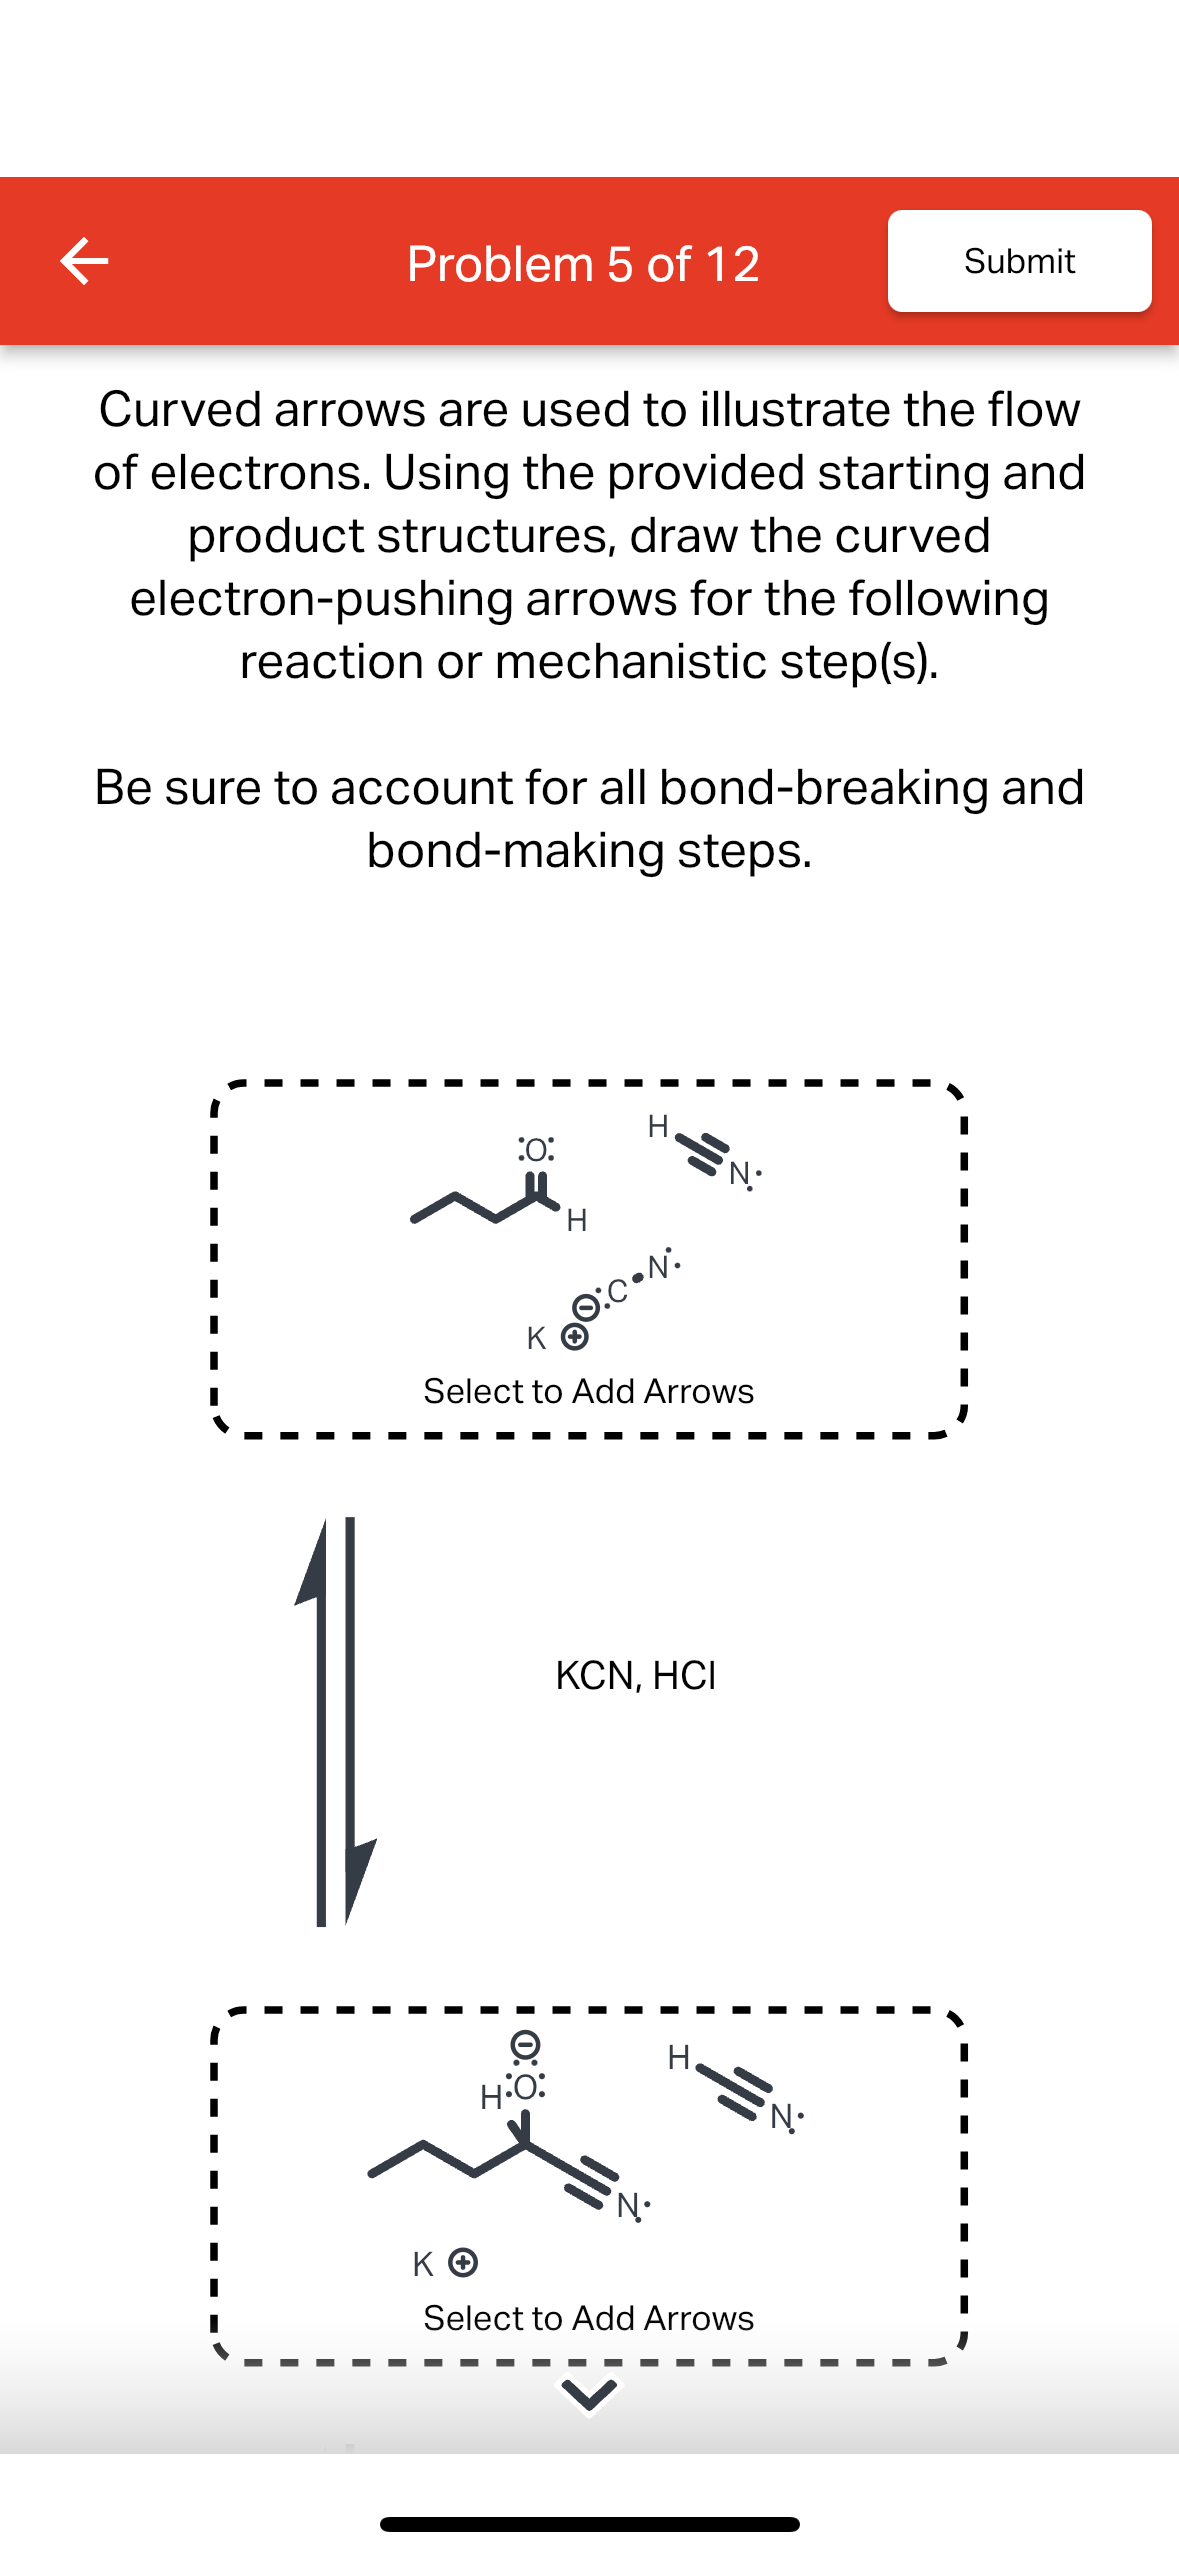 K
Problem 5 of 12
Curved arrows are used to illustrate the flow
of electrons. Using the provided starting and
product structures, draw the curved
electron-pushing arrows for the following
reaction or mechanistic step(s).
Be sure to account for all bond-breaking and
bond-making steps.
شہ
:0:
H
→
H:O:
H.
KⓇO:0•N:
ΚΘ
Select to Add Arrows
SN:
KCN, HCI
N•
H
Submit
ΚΘ
Select to Add Arrows
•N•